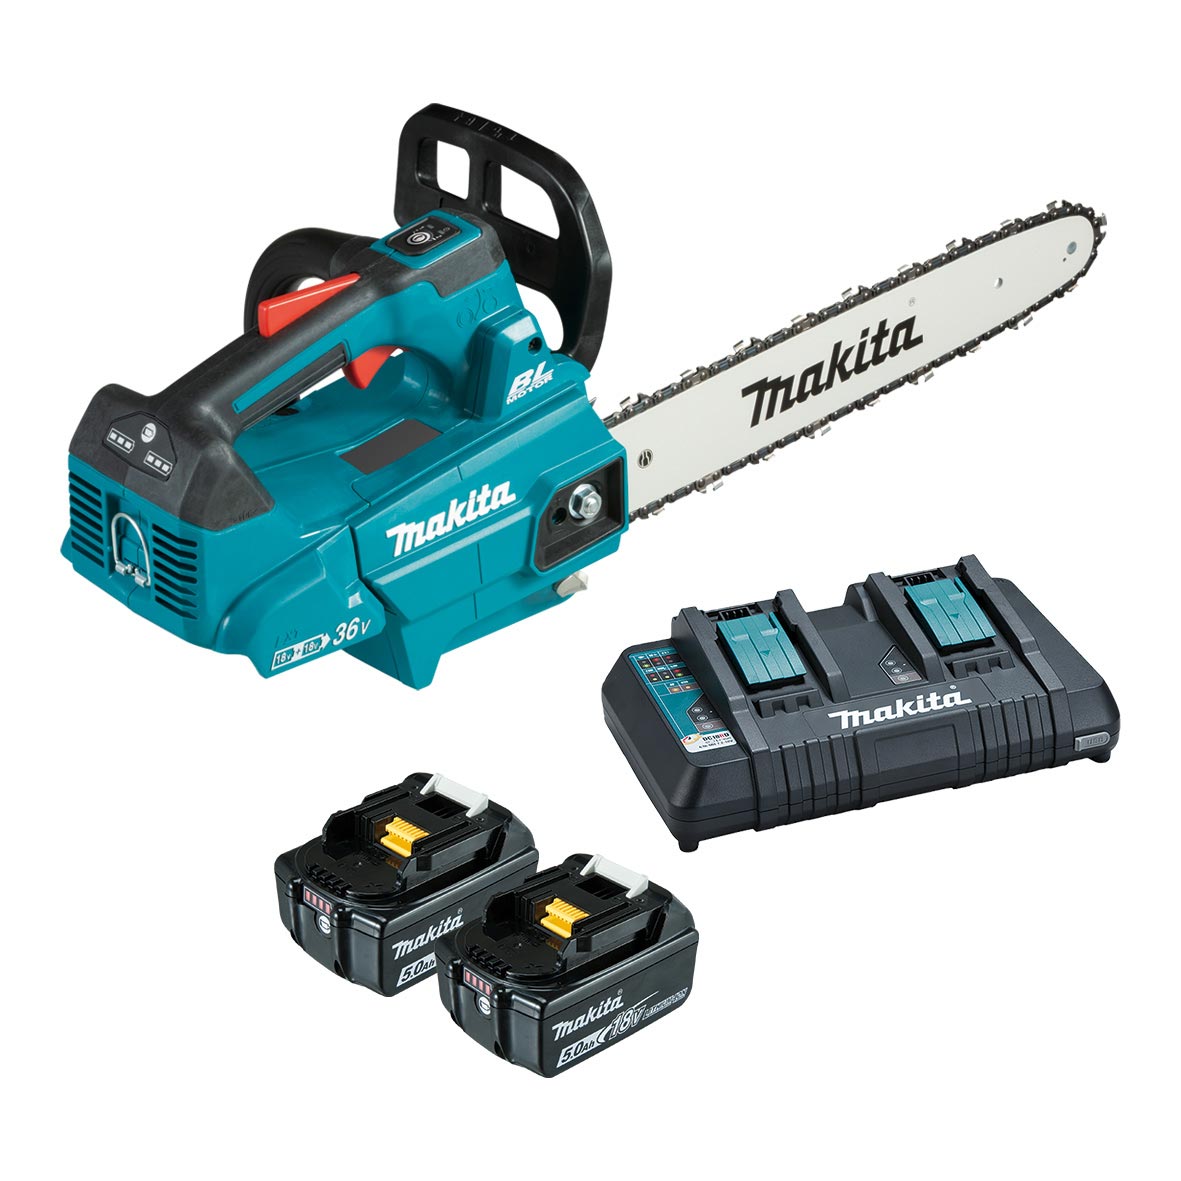 18Vx2 300mm (12") Brushless Top Handle Chainsaw Bare (Tool Only) DUC306Z by Makita